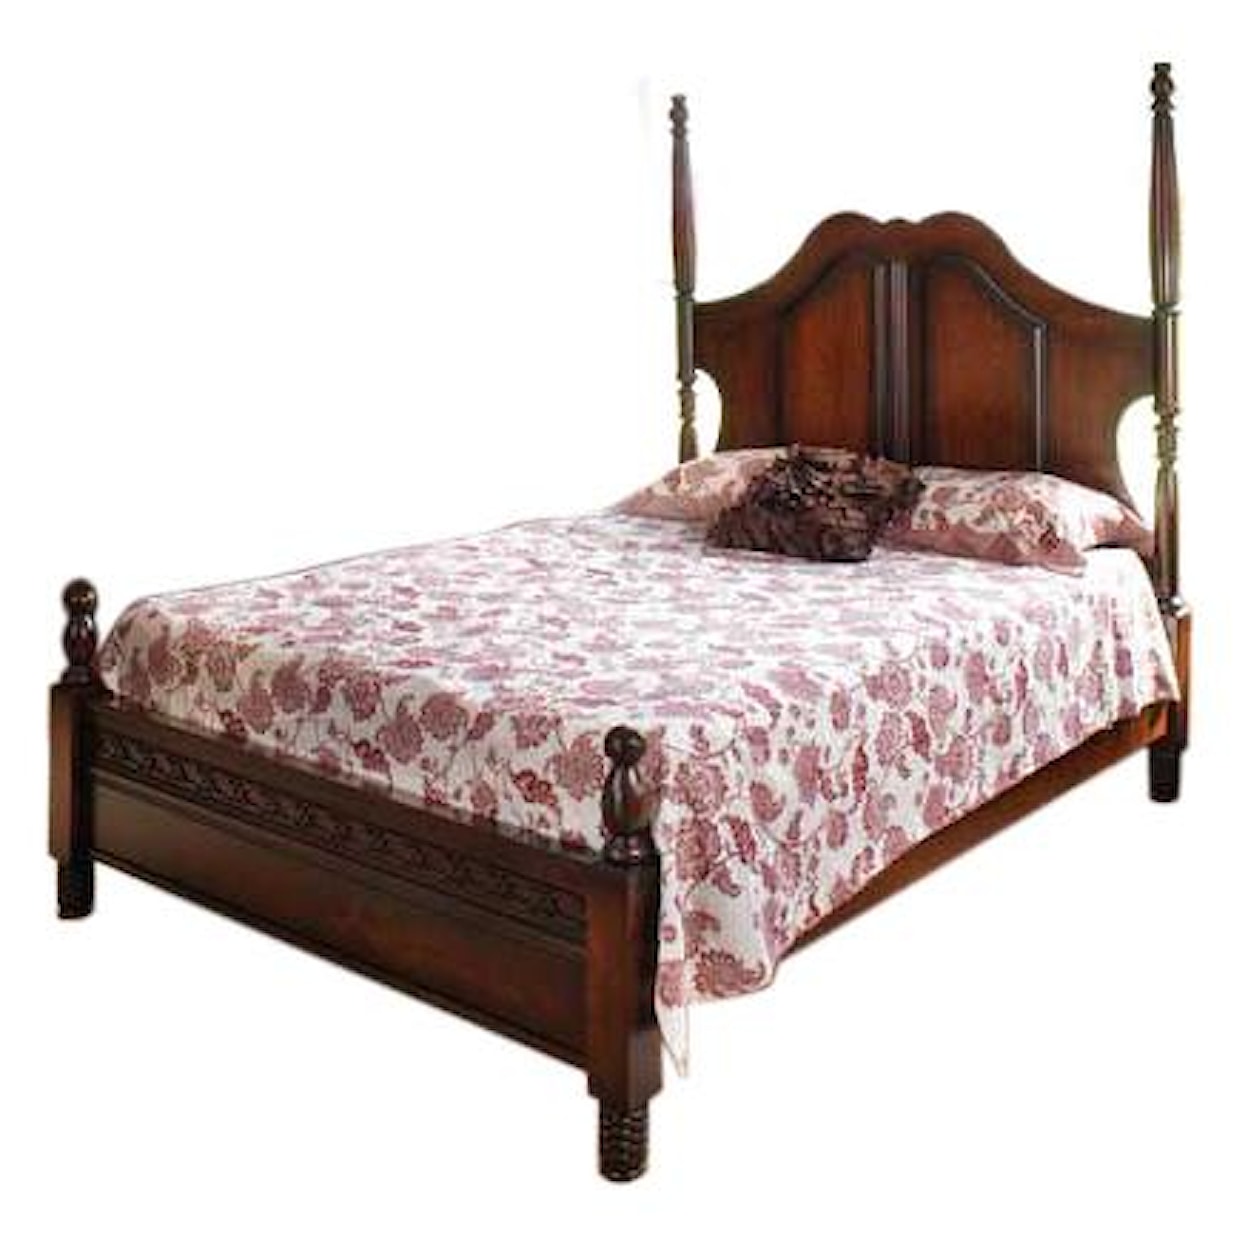 The Urban Collection New Generations Full Poster Bed